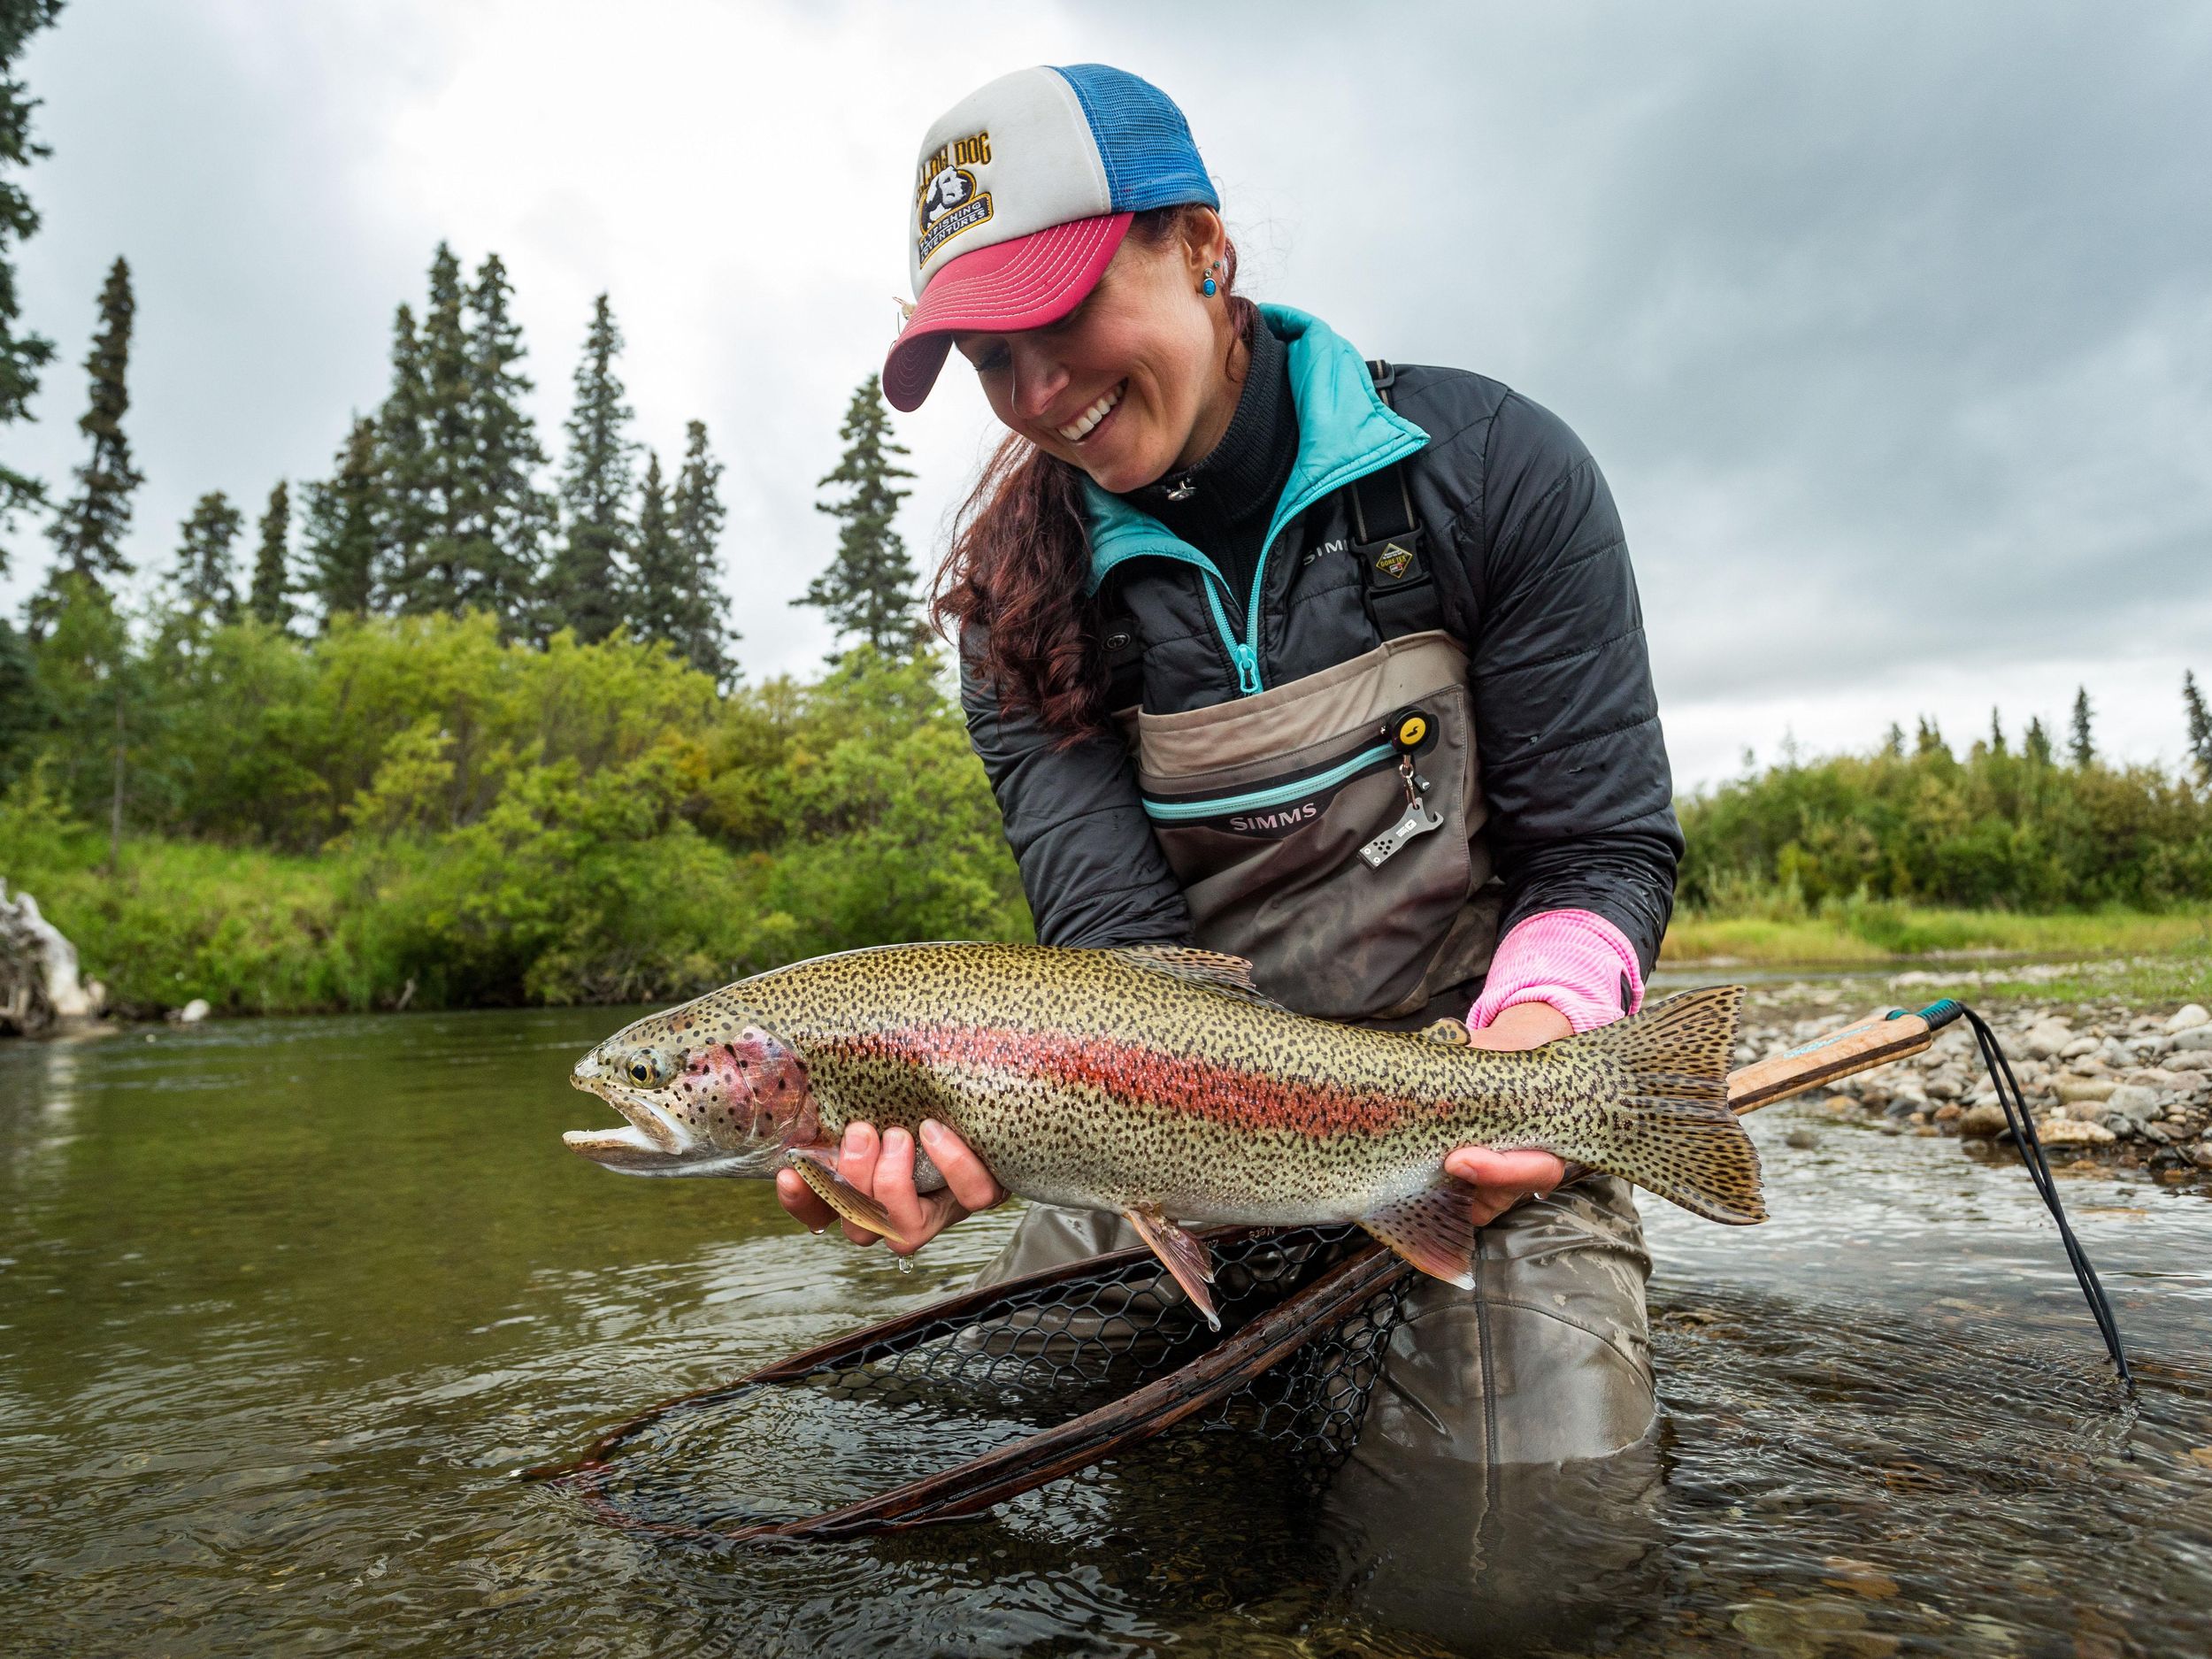 Fly fishing films feature women, conservation, big fish action